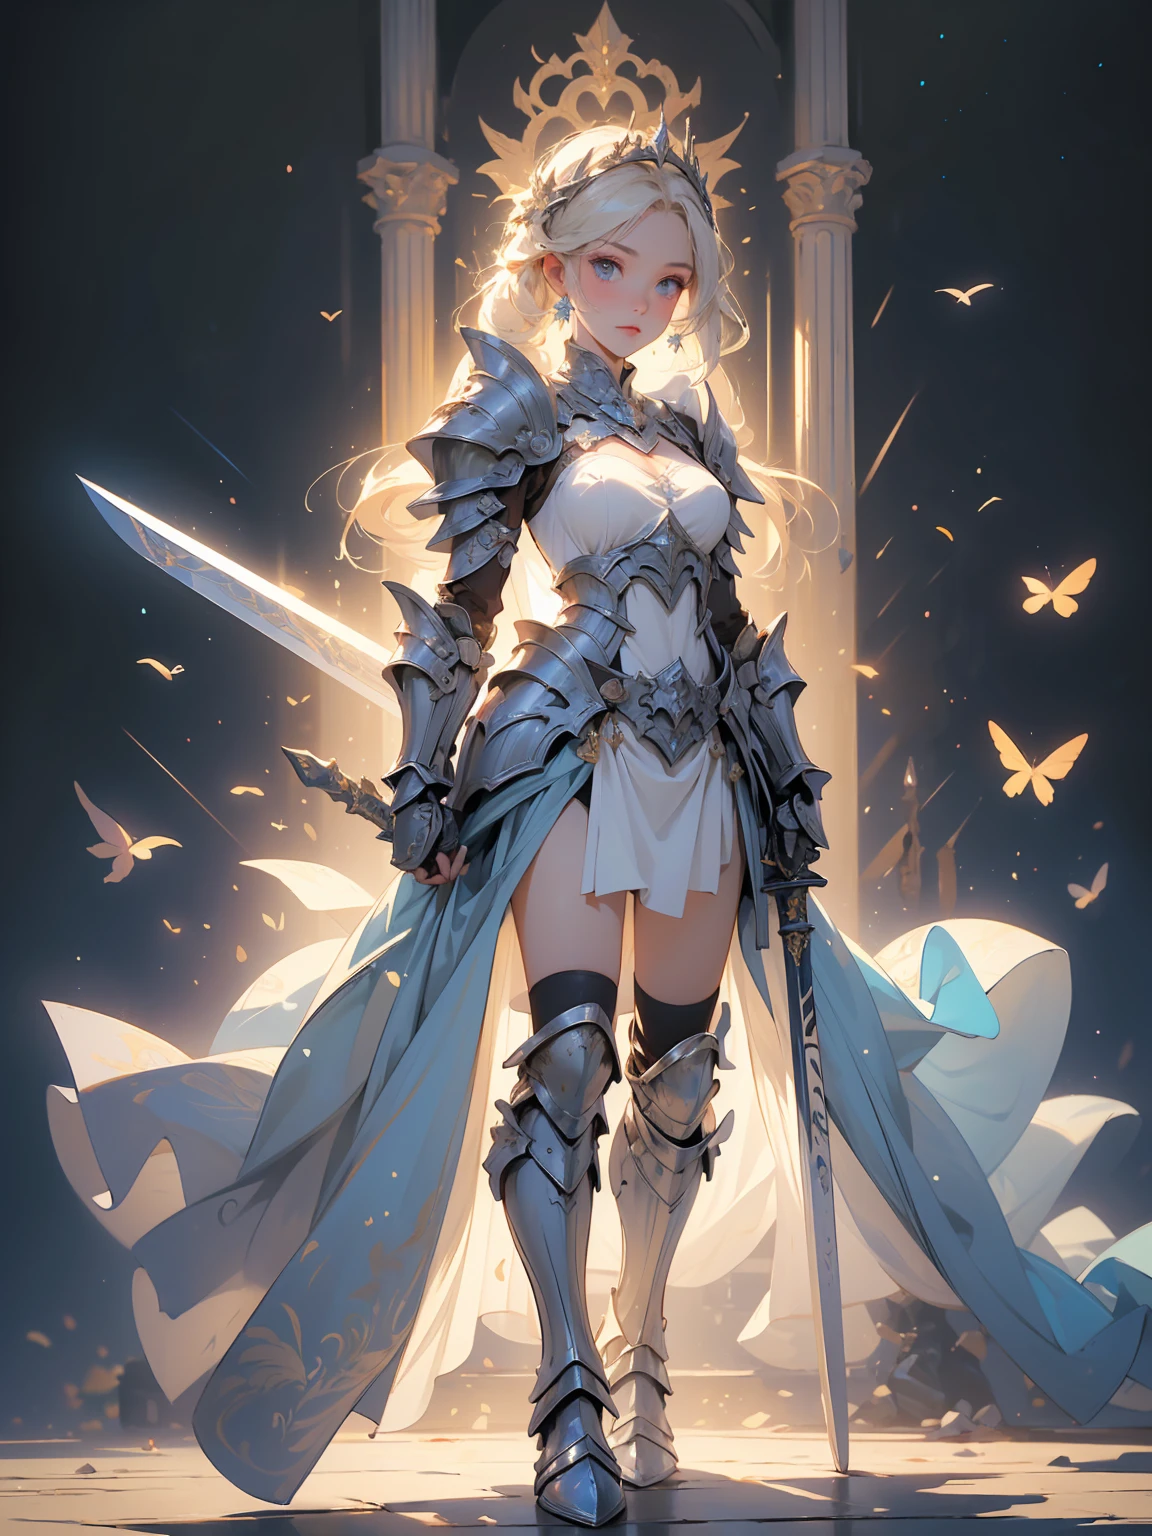 (((masterpiece, best quality, high detailed, 8k))) Design a layout showcase Gaming character, (1girl). valkyrie White|Blue|Gold armor, elegant and majestic. ((showcase weapon:1.4)), celestial sword. (masterpiece:1.2), (best quality), 4k, ultra-detailed. (Step by step design, layout art:1.5), (luminous lighting, atmospheric lighting). divine warrior, ((glove full hands)), (((regal armor:1.3))), shoulder pauldrons, armored boots, (((full_body_shot:1.4))). {In a radiant celestial realm}.